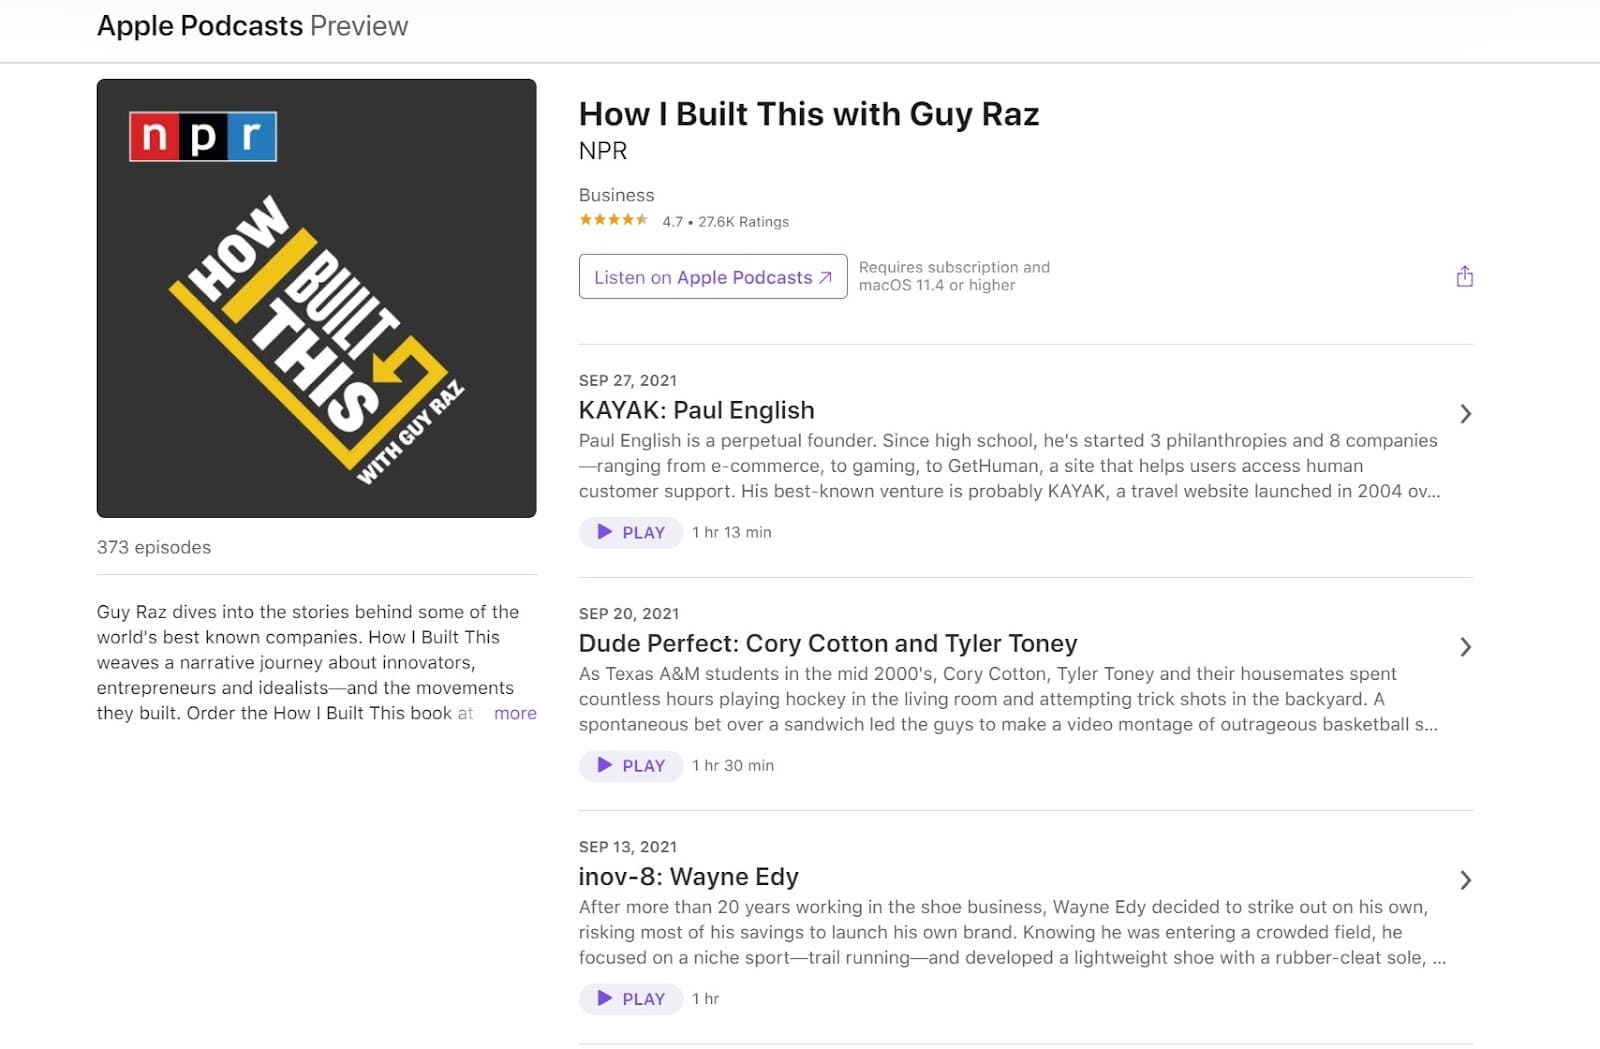 Screenshot of the How I Built This Podcast